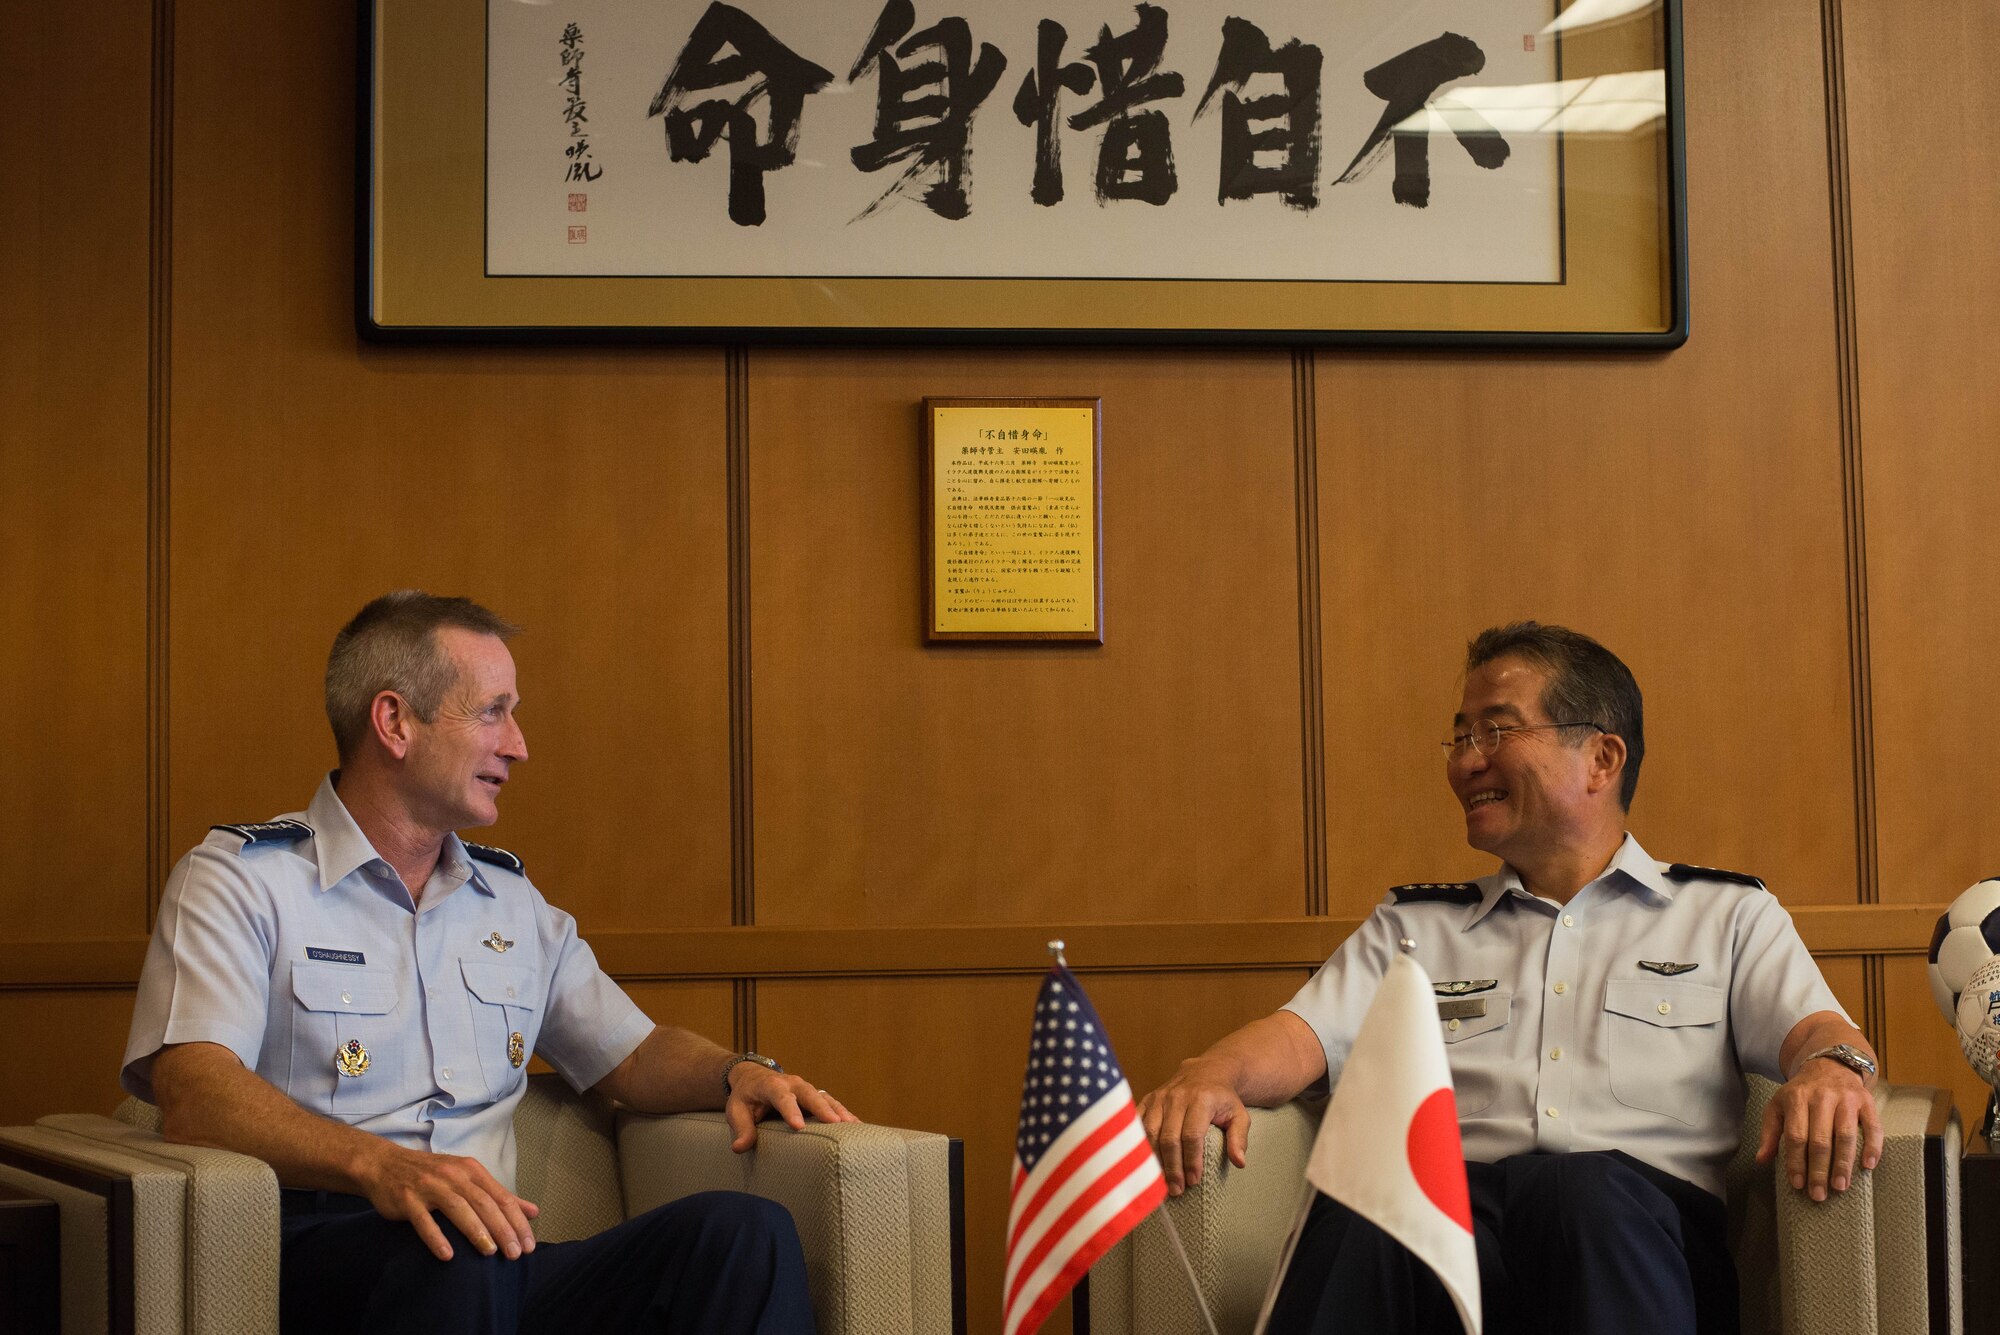 U.S. Air Force Gen. Terrence J. O’Shaughnessy, Pacific Air Forces commander, shakes hands with Lt. Gen. Jerry P. Martinez, U.S. Forces Japan and 5th Air Force commander, Aug. 30, 2017, at Yokota Air Base, Japan. O’Shaughnessy’s visit was to reaffirm the strength of the partnership between the U.S. Air Force and the Japan Air Self-Defense Force. (U.S. Air Force photo by Airman 1st Class Kevin West)